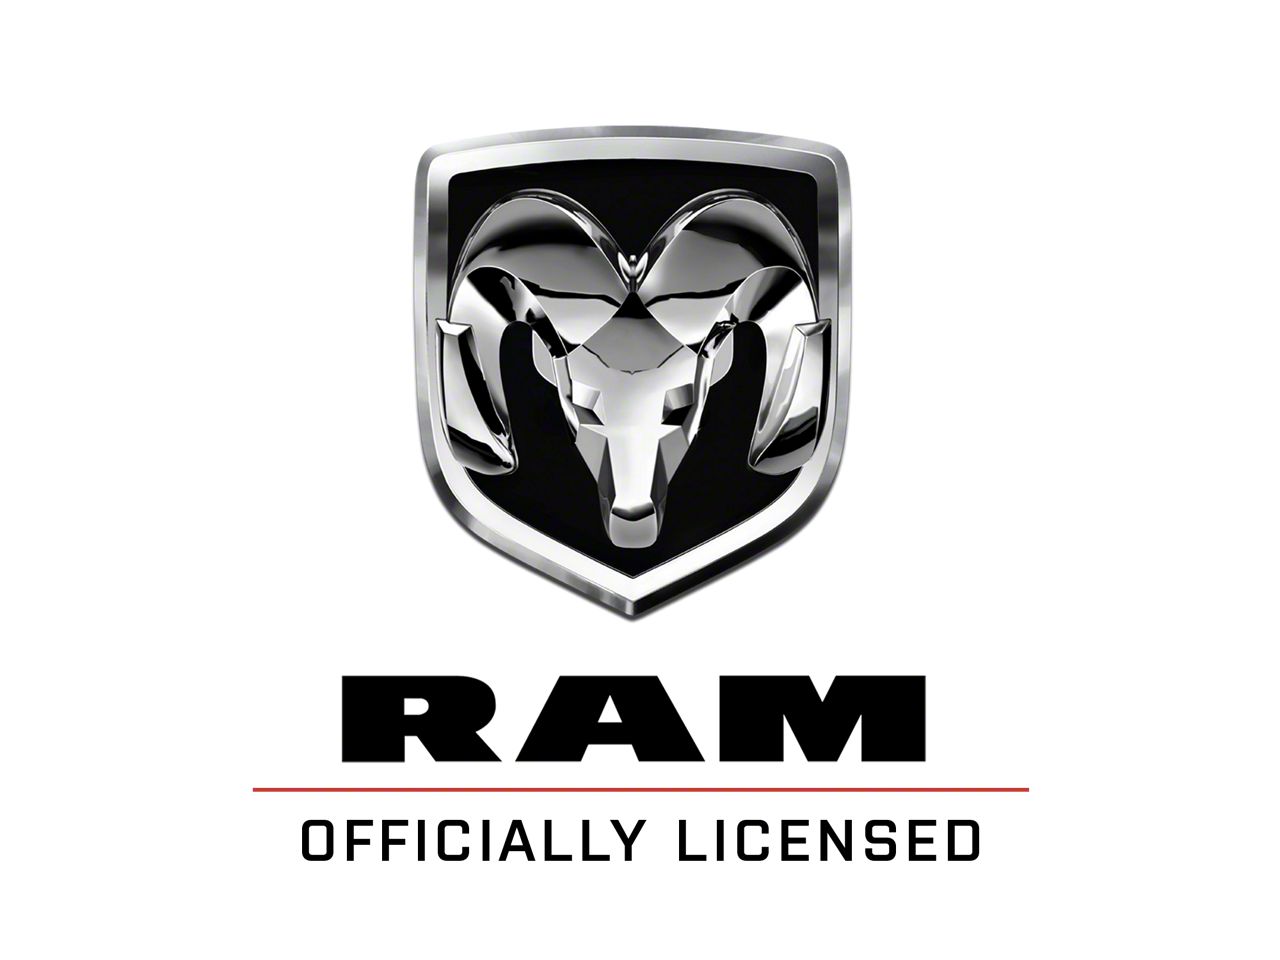 Ram Officially Licensed Parts